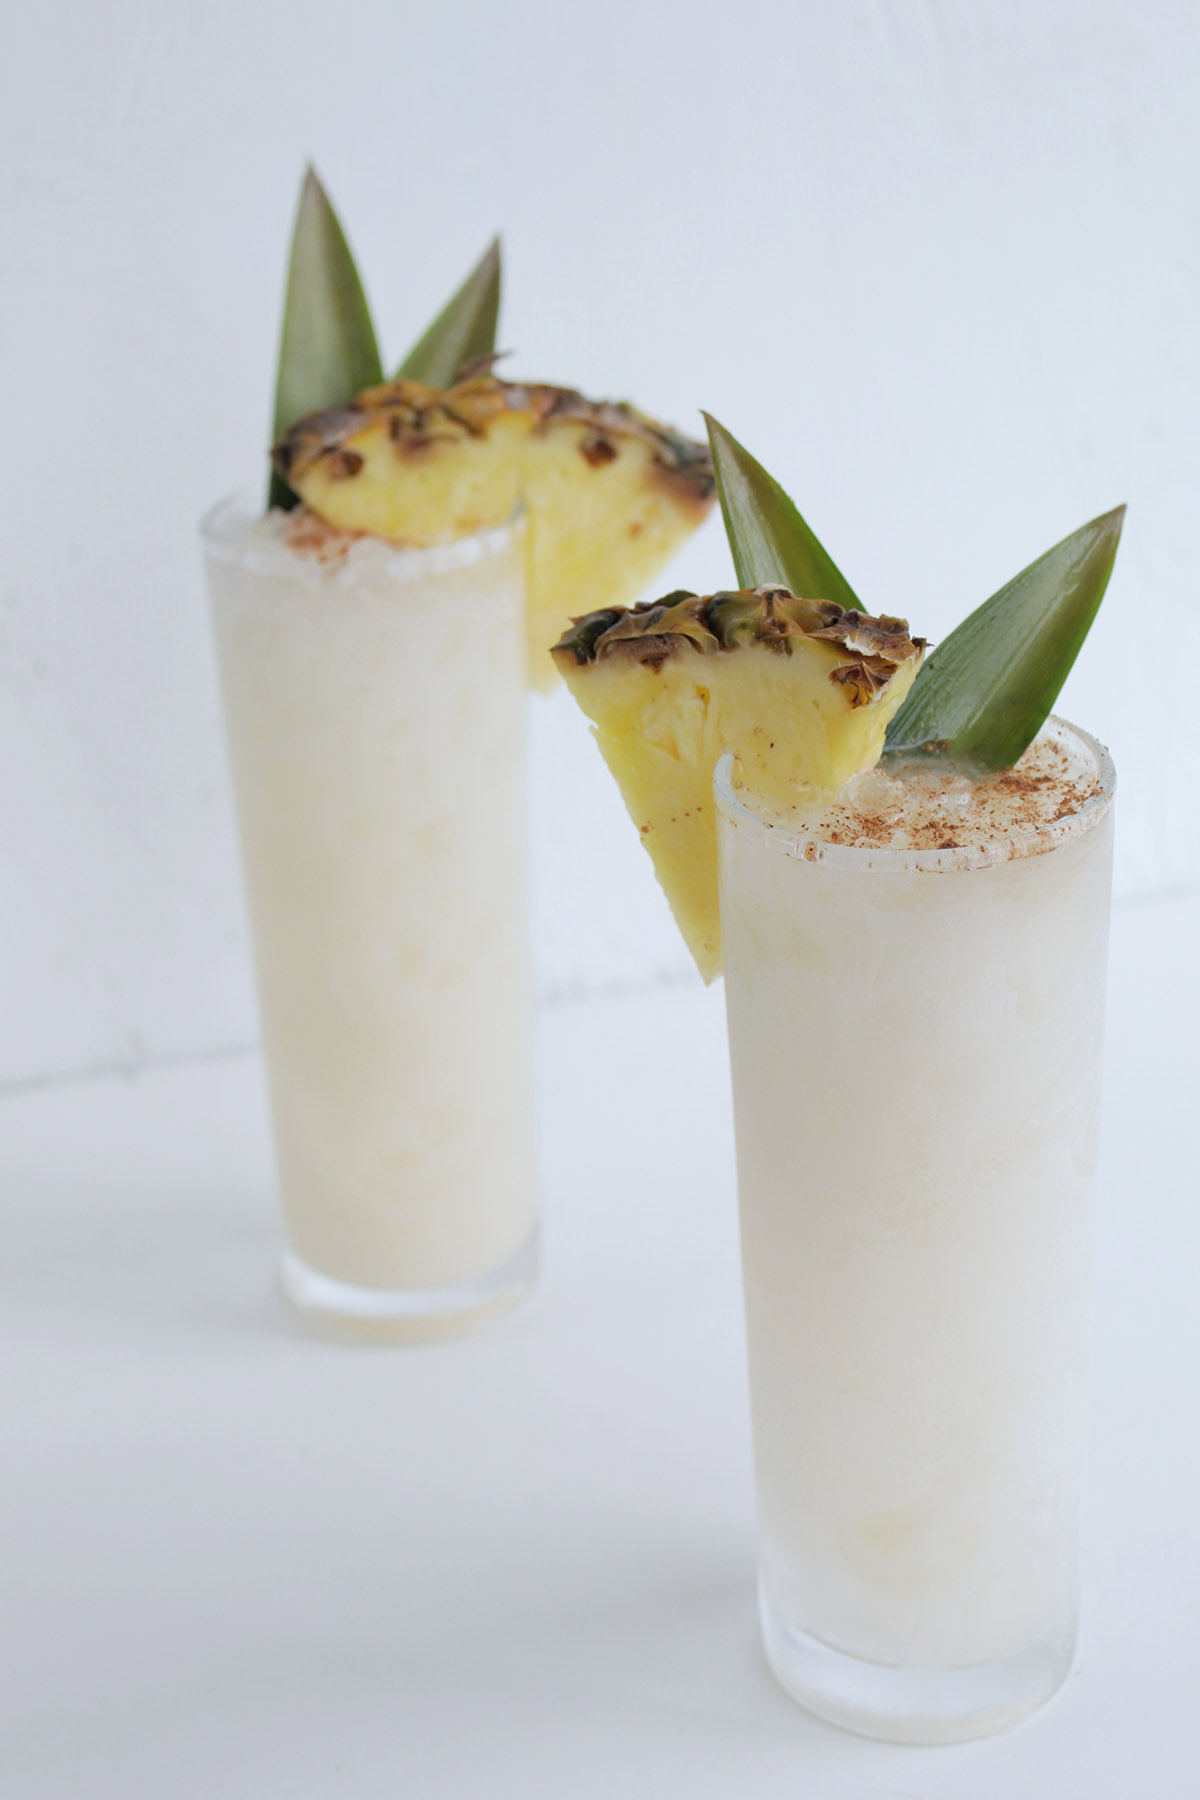 screwball whisky drink with pineapple garnish.